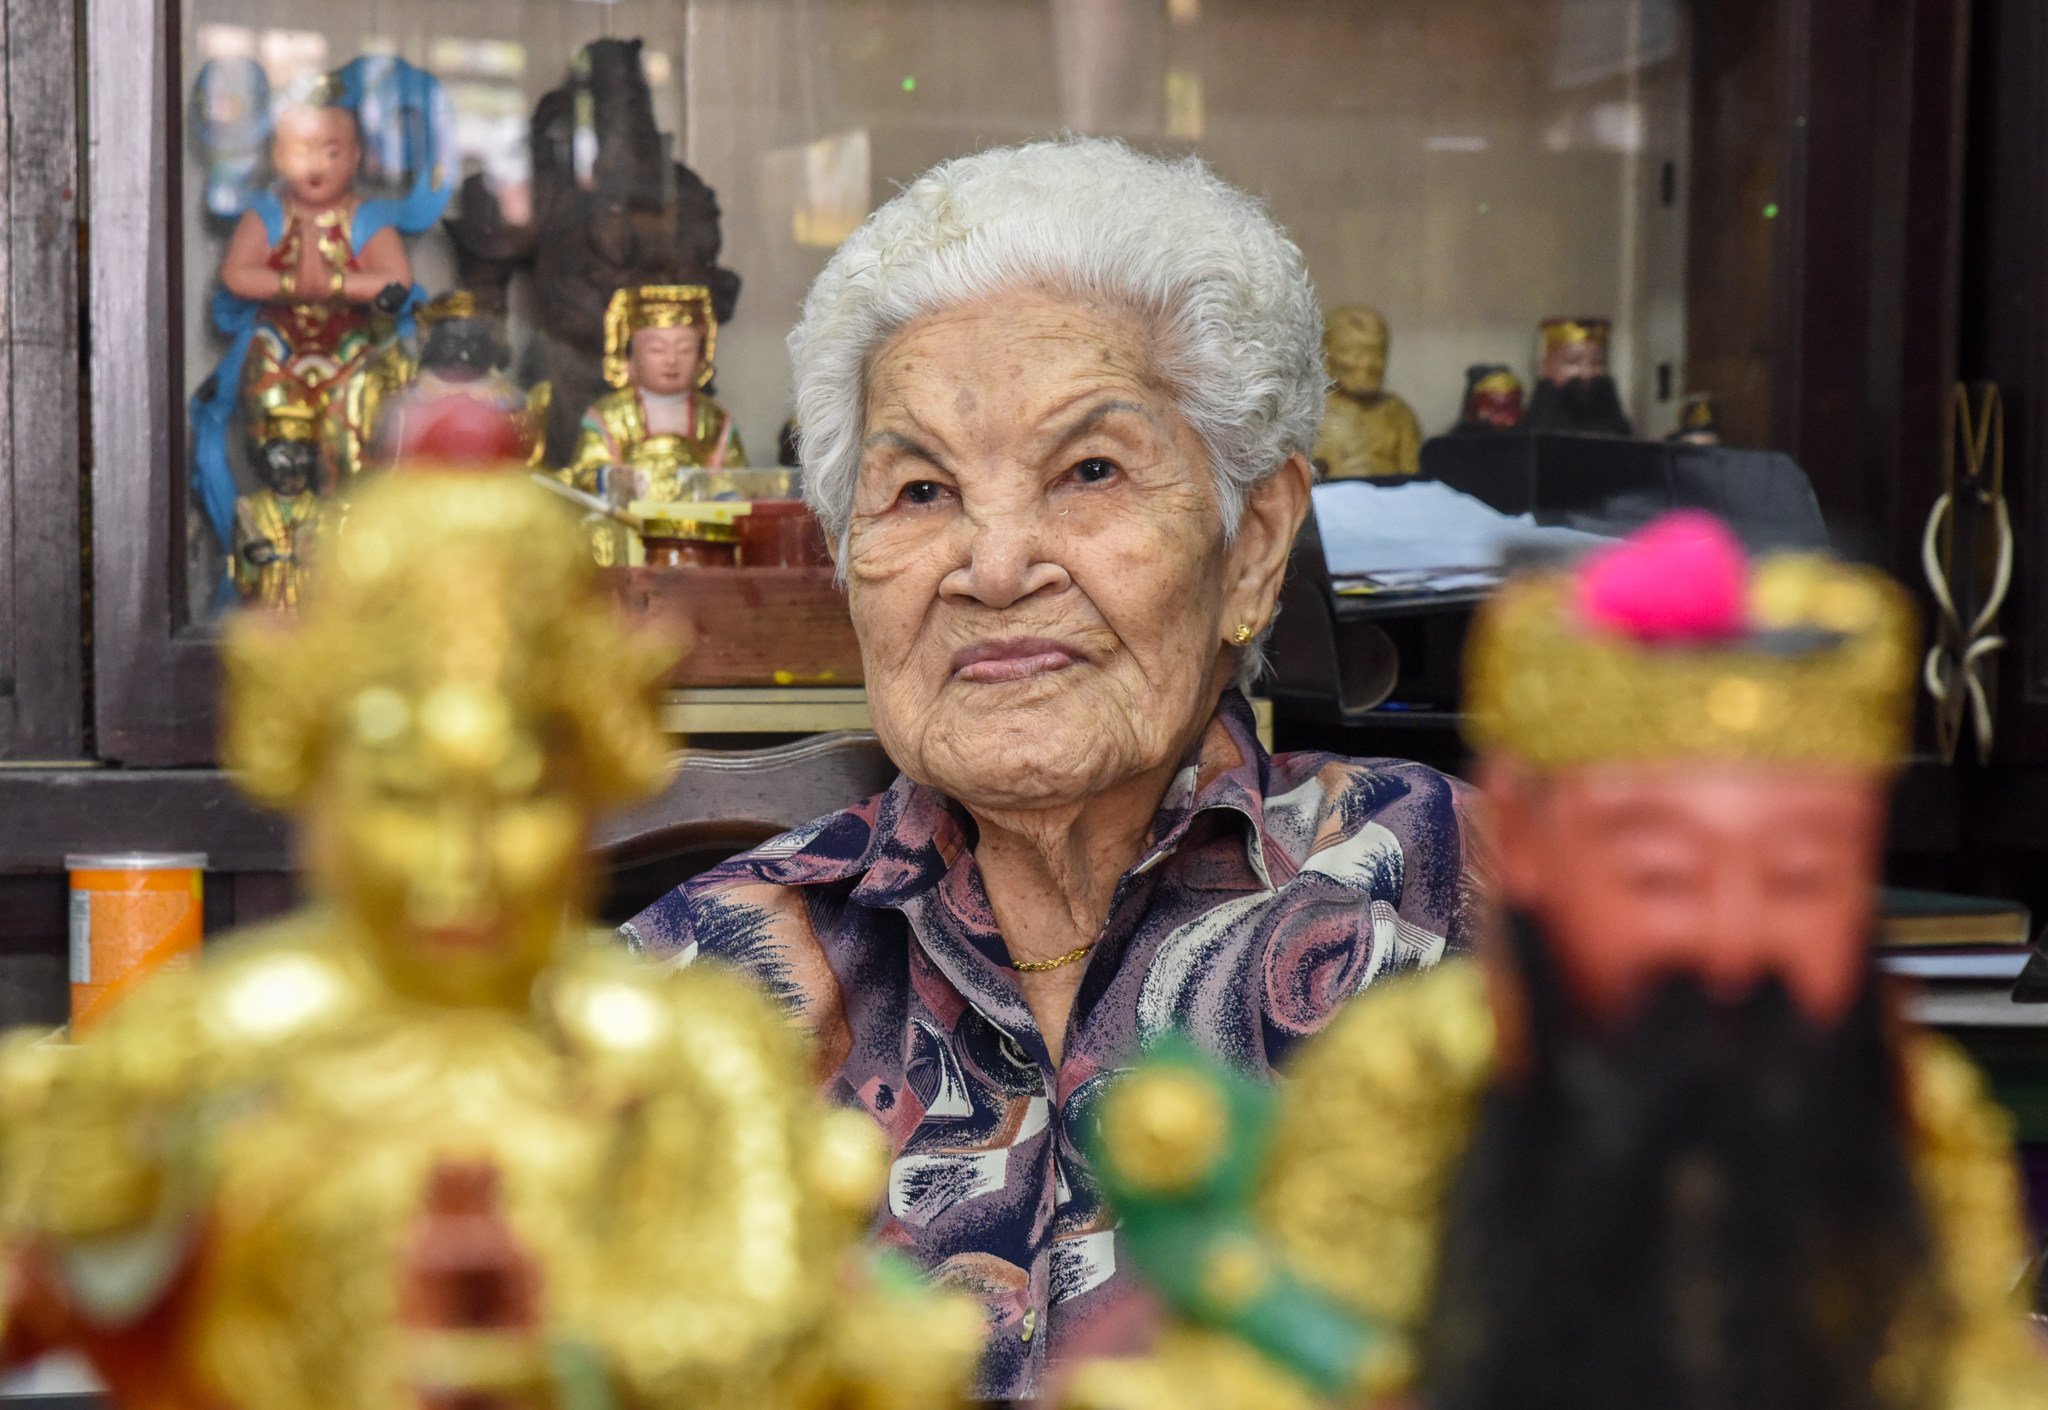 Tan Chwee Lian is the matriarch behind Say Tian Hng, Singapore’s last Taoist idol business. She is retired, but the business continues through her family. Photo: Ronan O’Connell